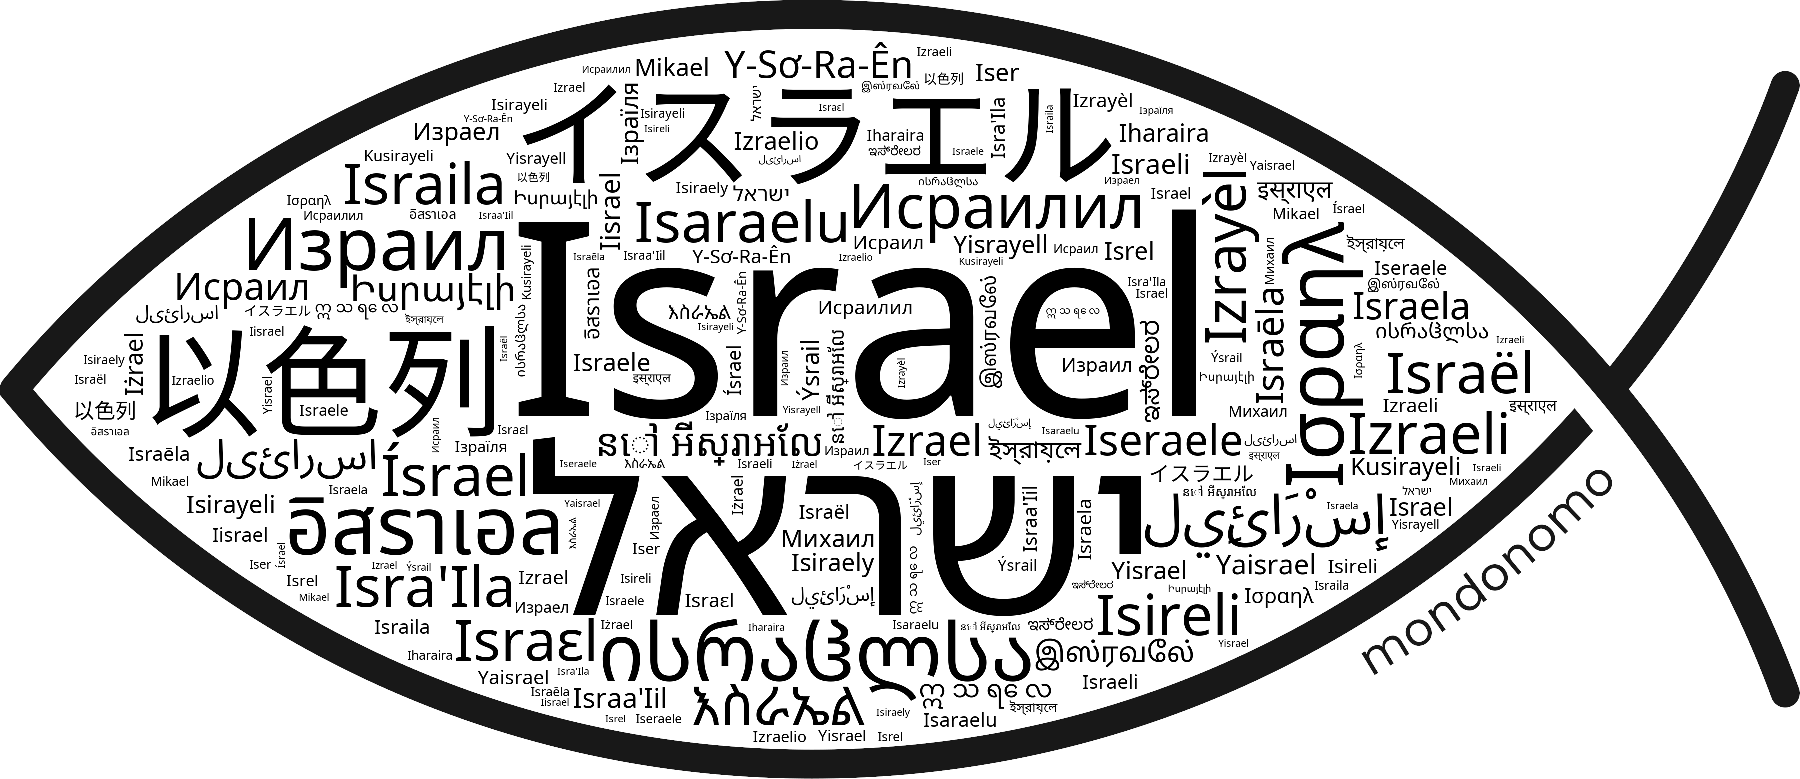 Name Israel in the world's Bibles